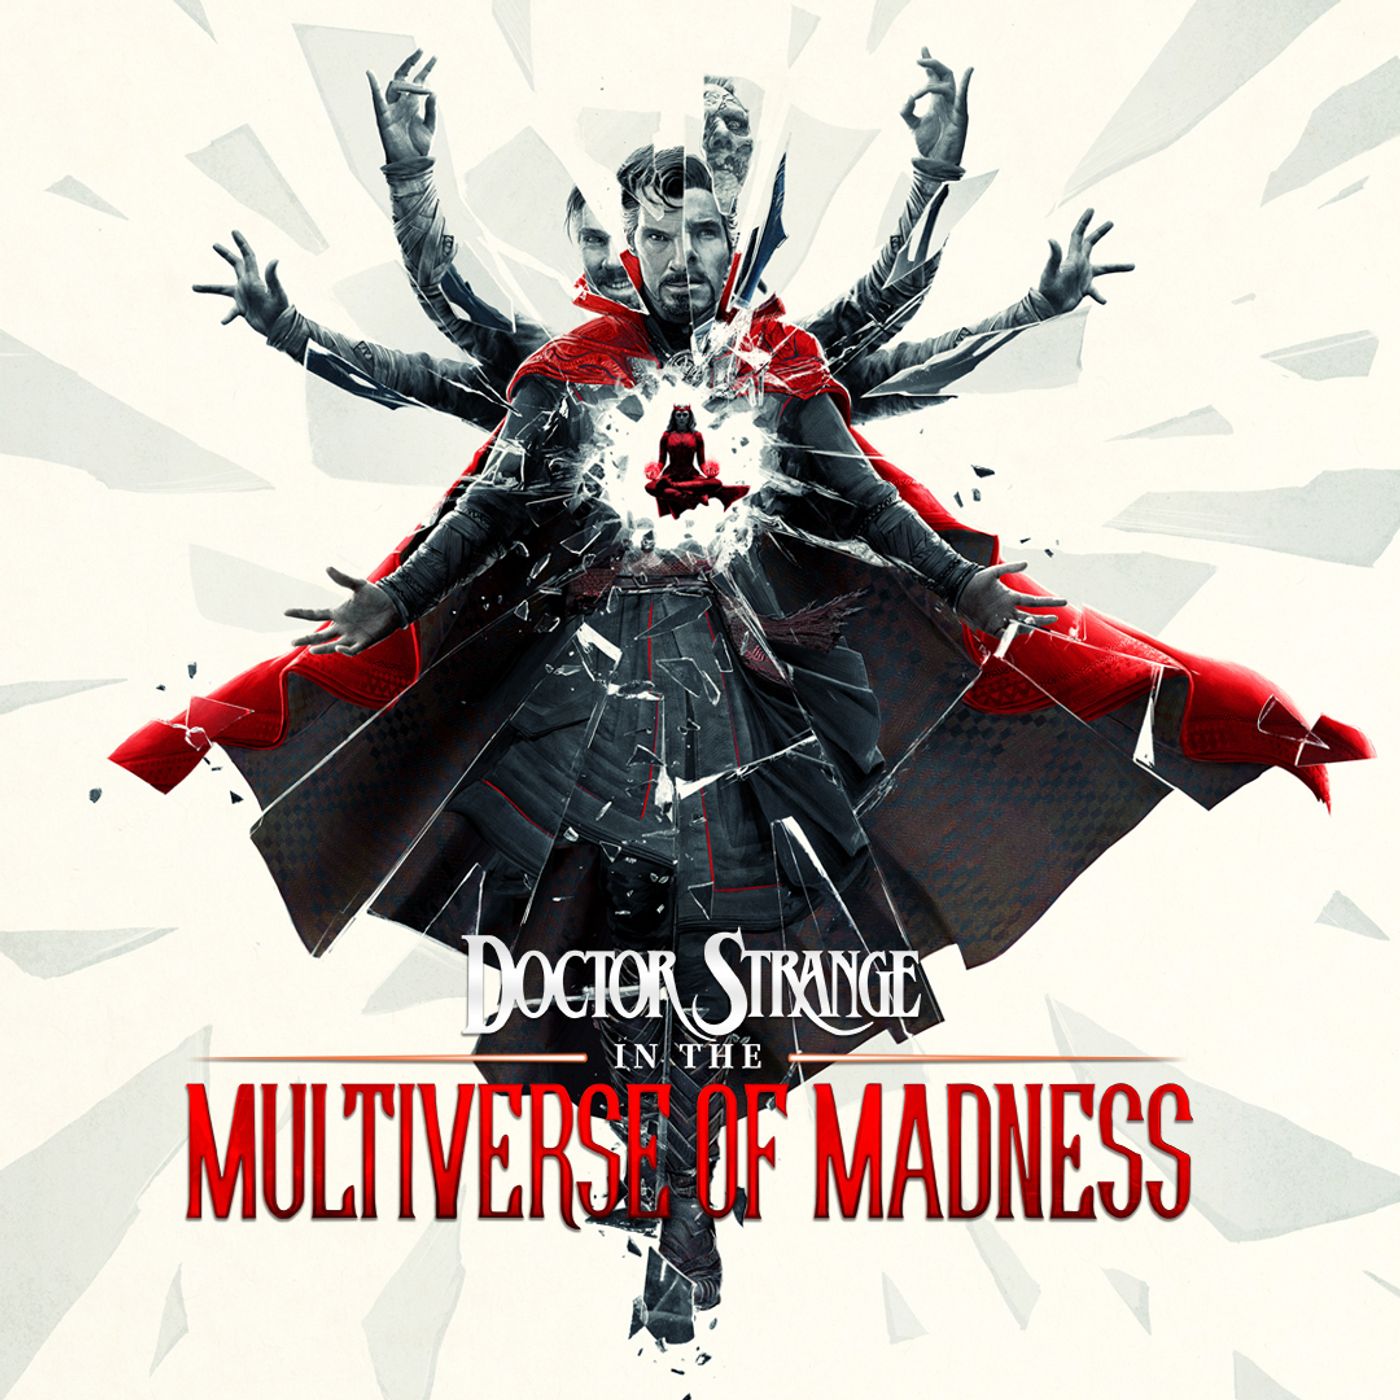 292: "Doctor Strange In The Multiverse Of Madness"